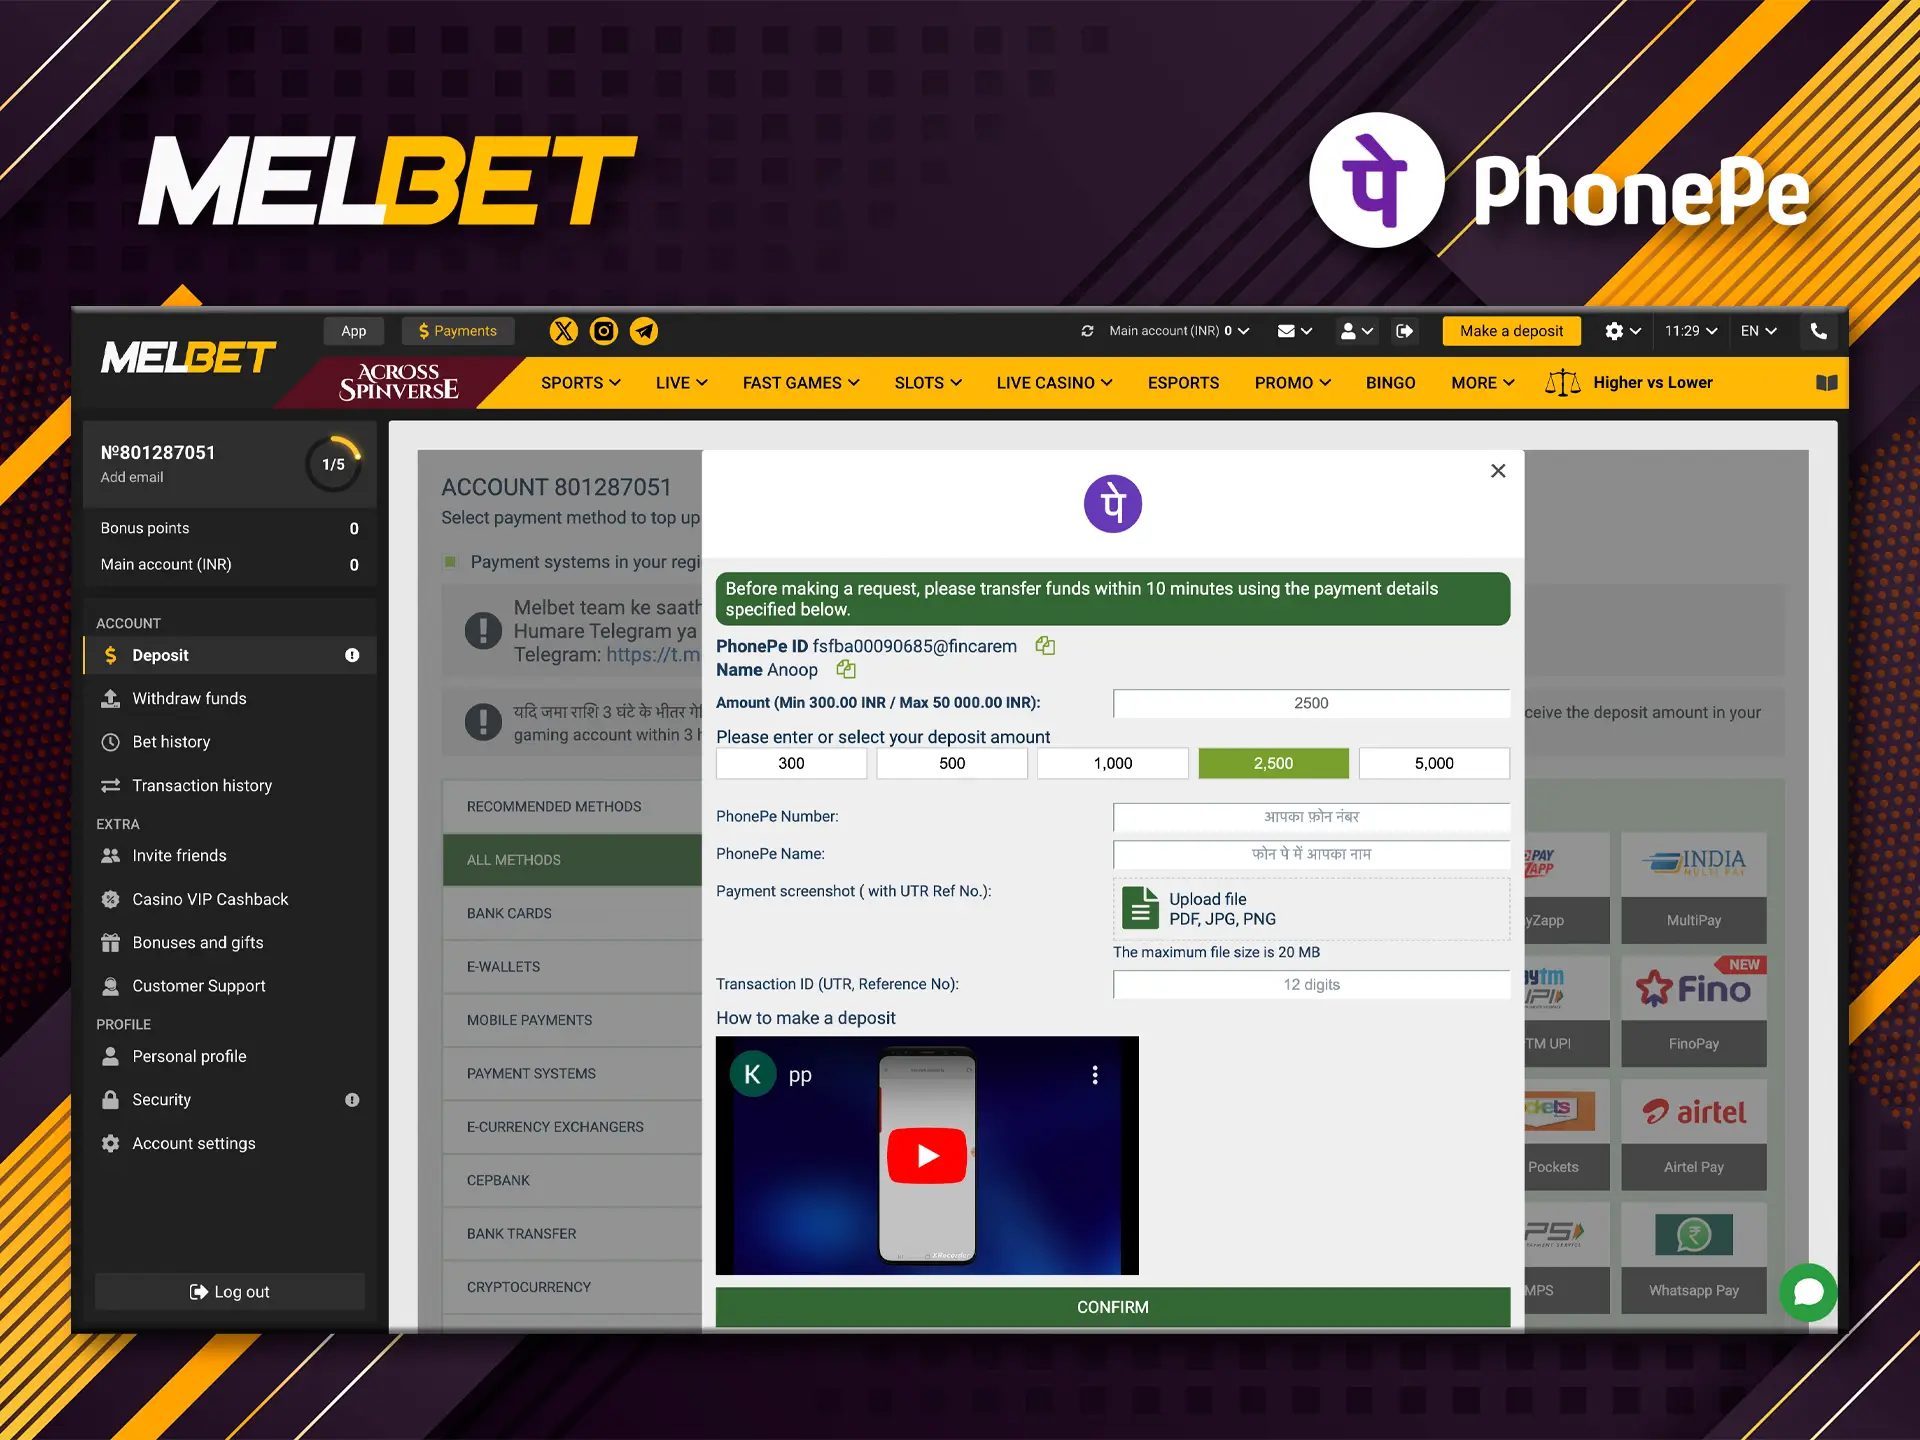 PhonePe gives Melbet users a commission-free top-up of their personal account.